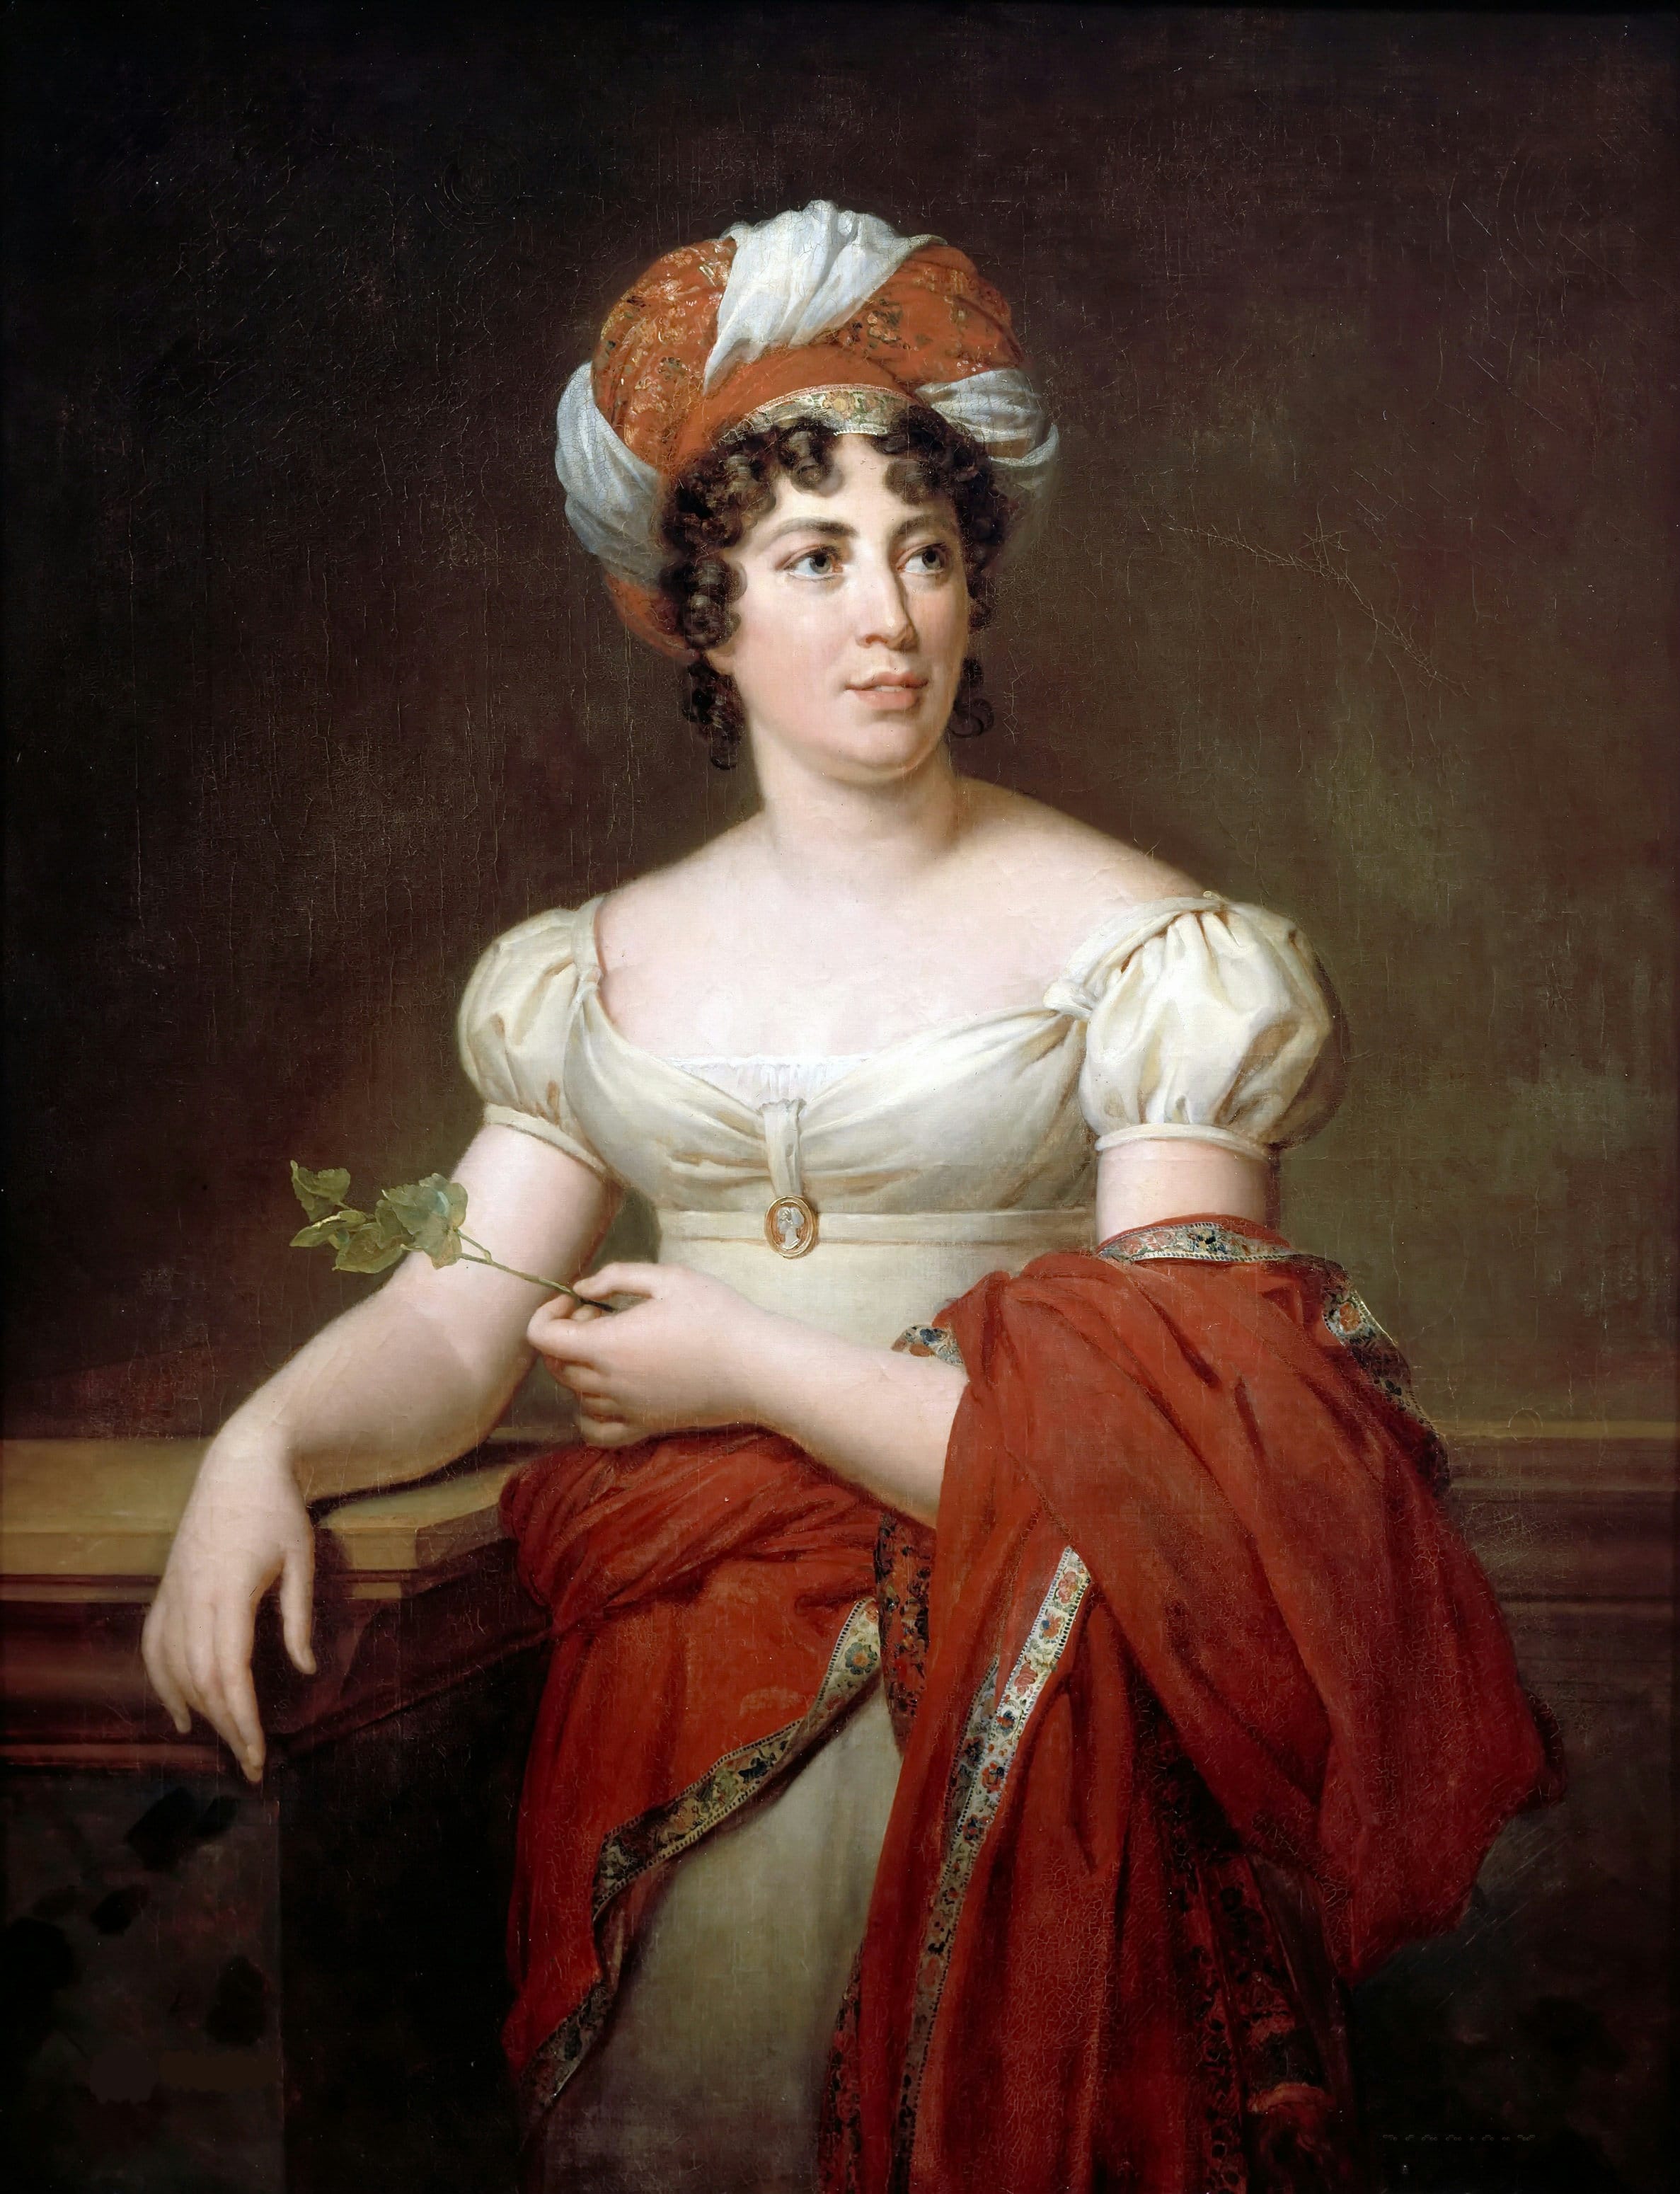 Portrait of Germaine de Staël by Marie-Éléonore Godefroid after François Gérard. First half of the 19th century. Painting kept at the Palace of Versailles.